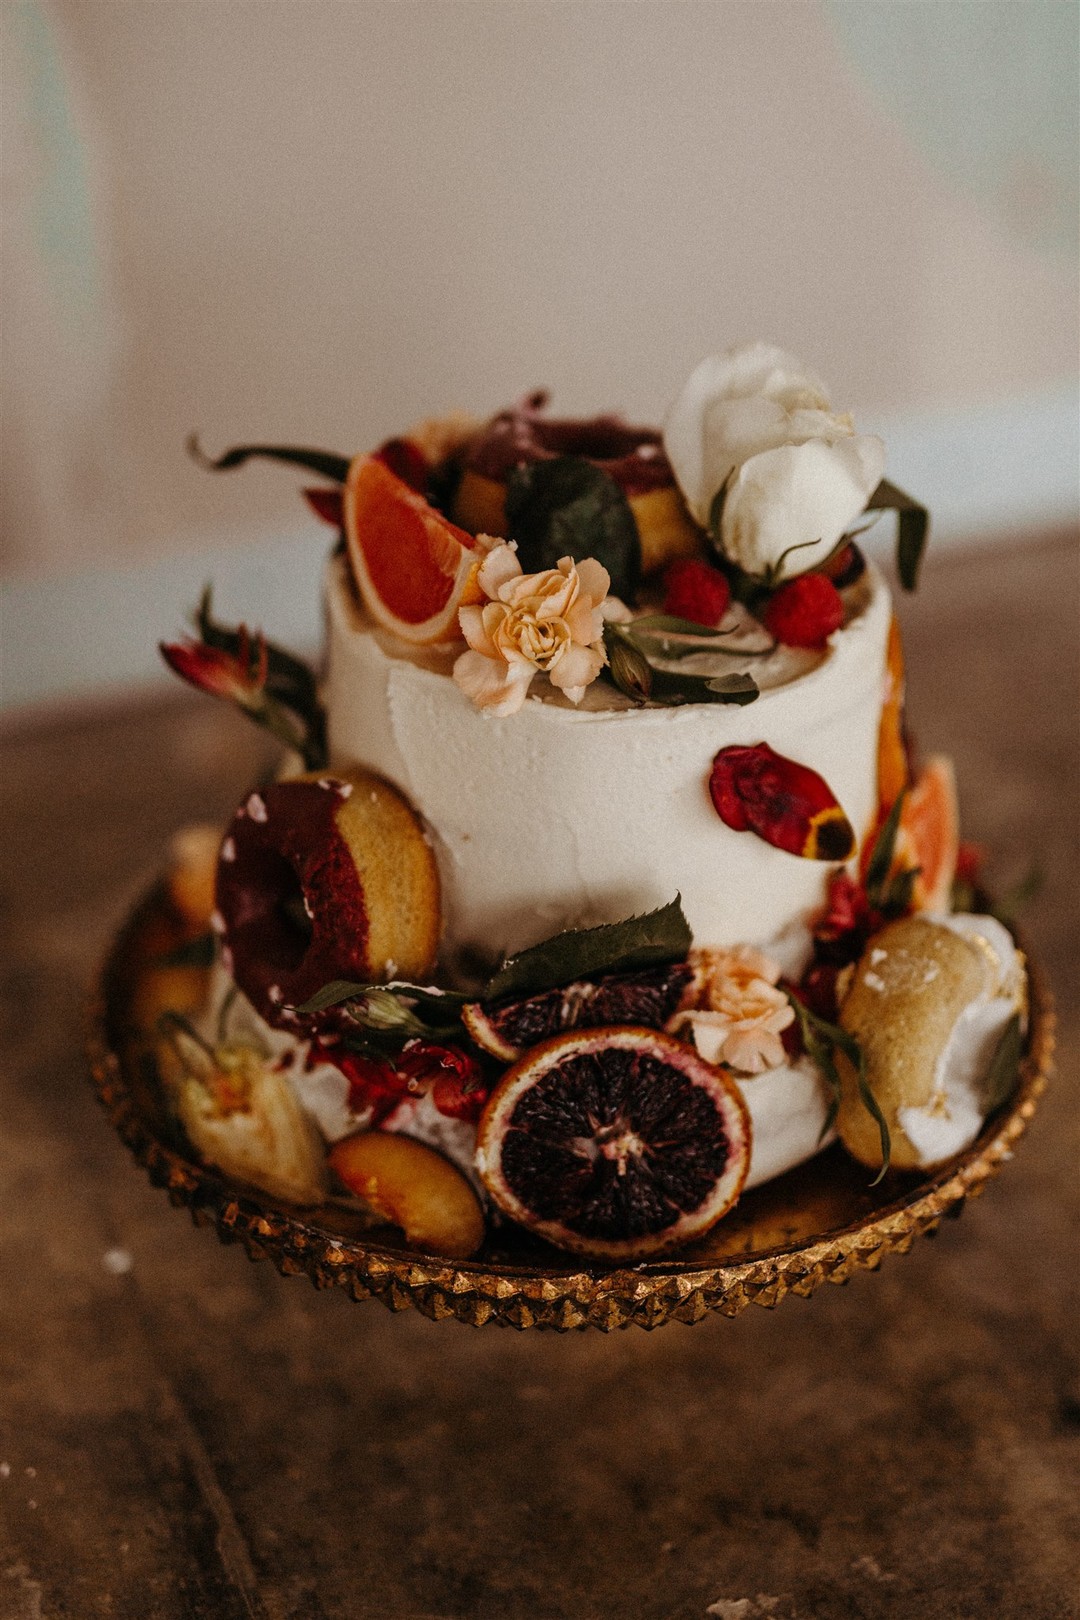 The wedding cake was a white textural one, with fruit fruits, blooms, greenery and foliage